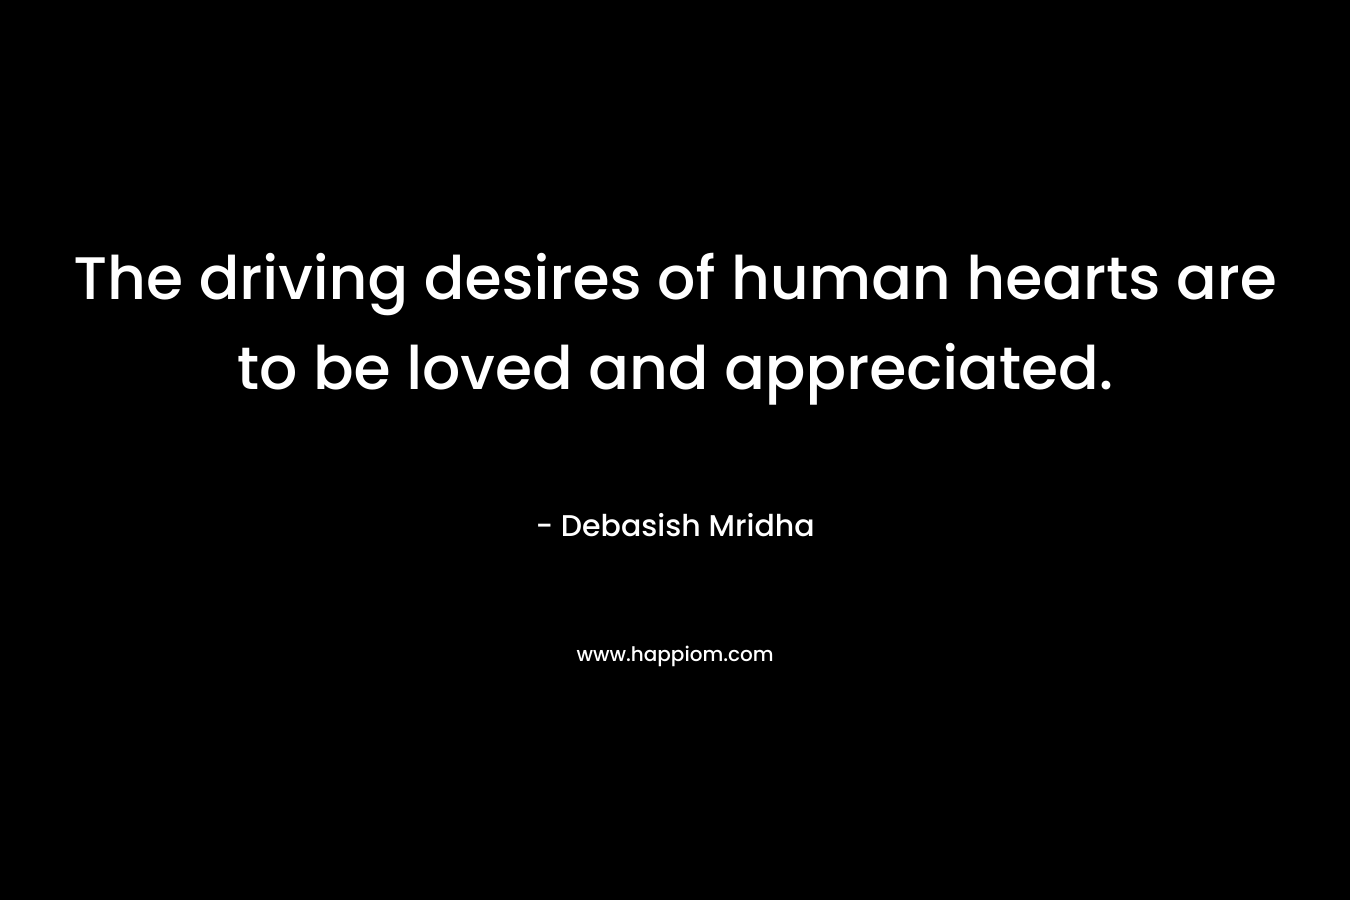 The driving desires of human hearts are to be loved and appreciated.